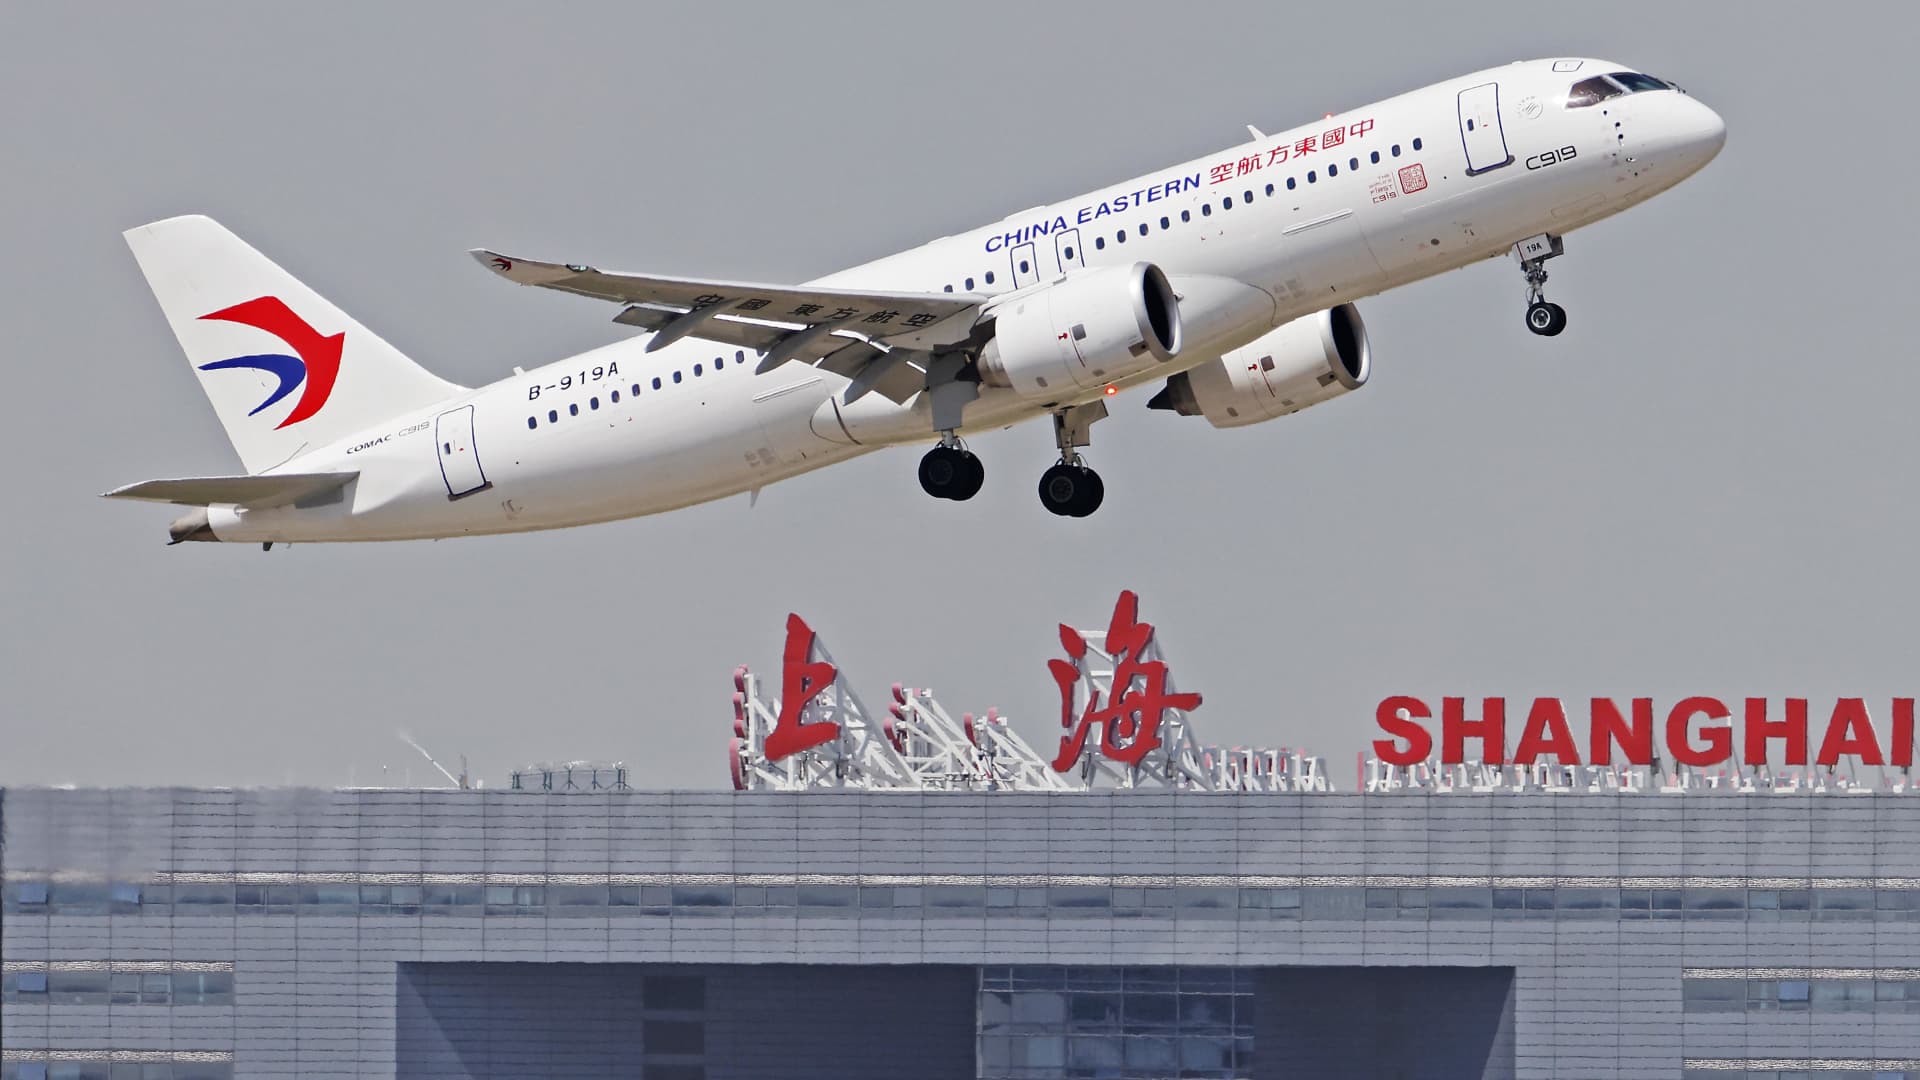 Chinese passenger airlines will be allowed to boost their weekly round-trip U.S. flights to 50 starting on March 31, up from the current 35, the U.S. Transportation Department said on Monday, returning the market to about one-third of pre-pandemic levels.